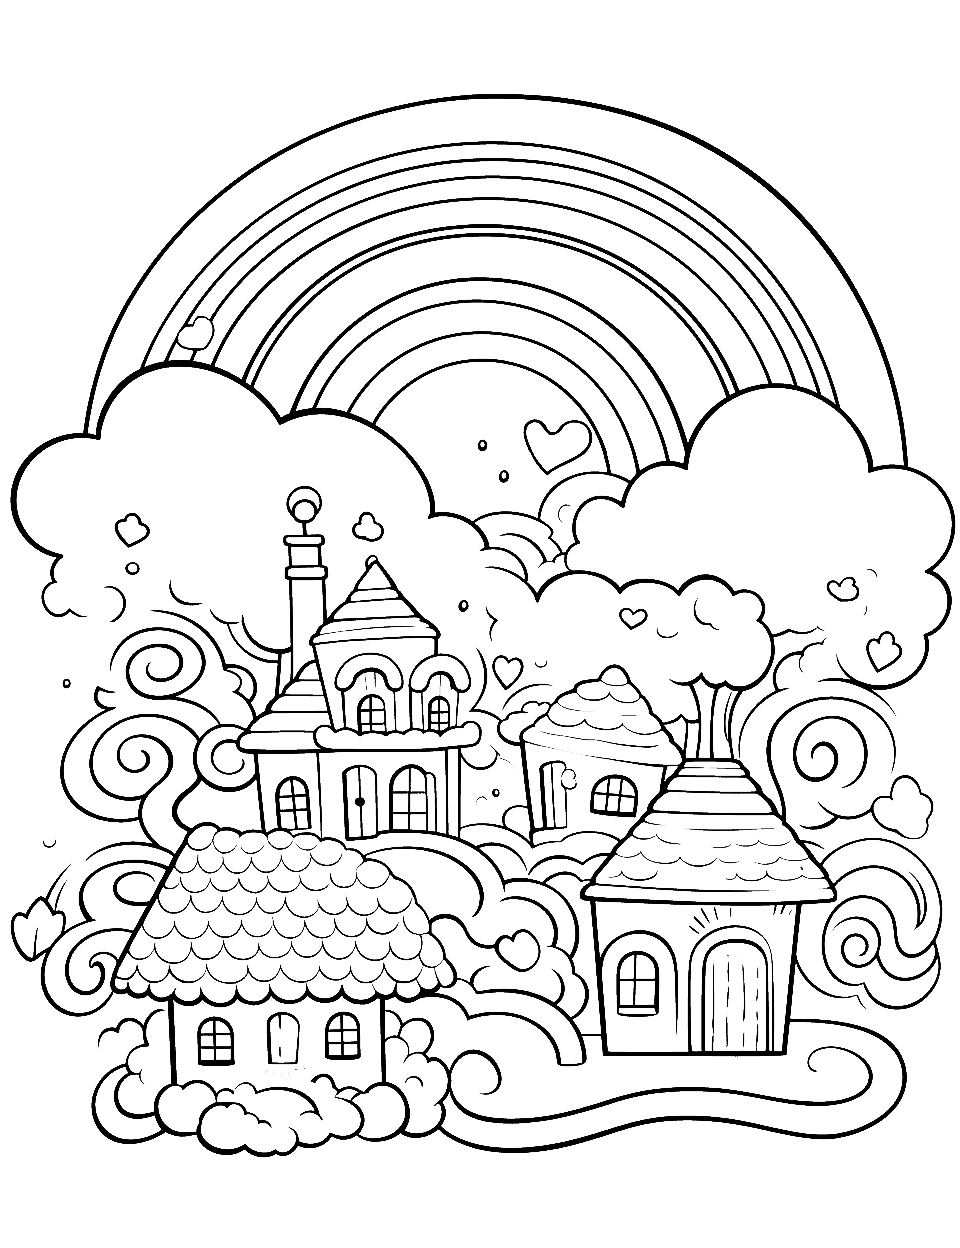 Rainbow coloring pages free printable sheets